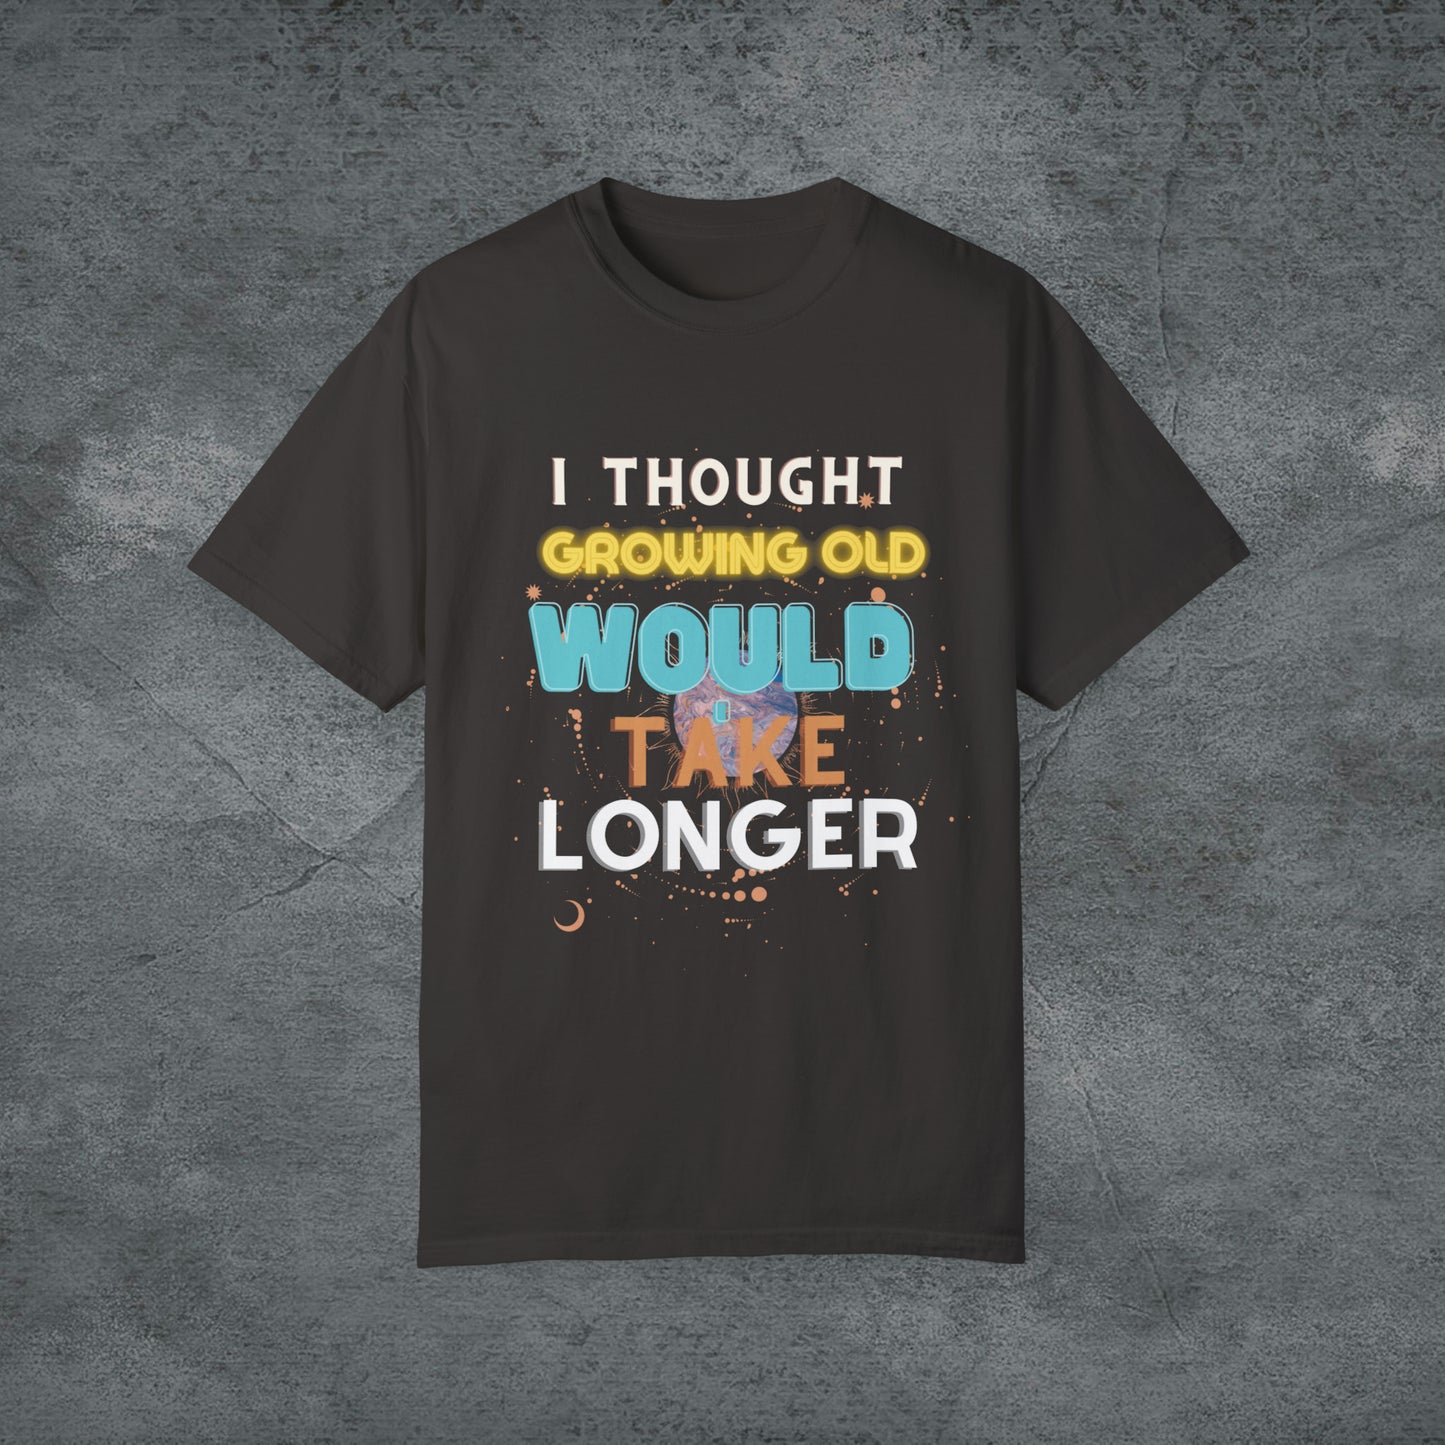 I Thought Growing Old Would Take Longer T-Shirt | Getting Older T Shirt | Funny Adulting T-Shirt | Old Age T Shirt | Old Person T Shirt T-Shirt Graphite S 